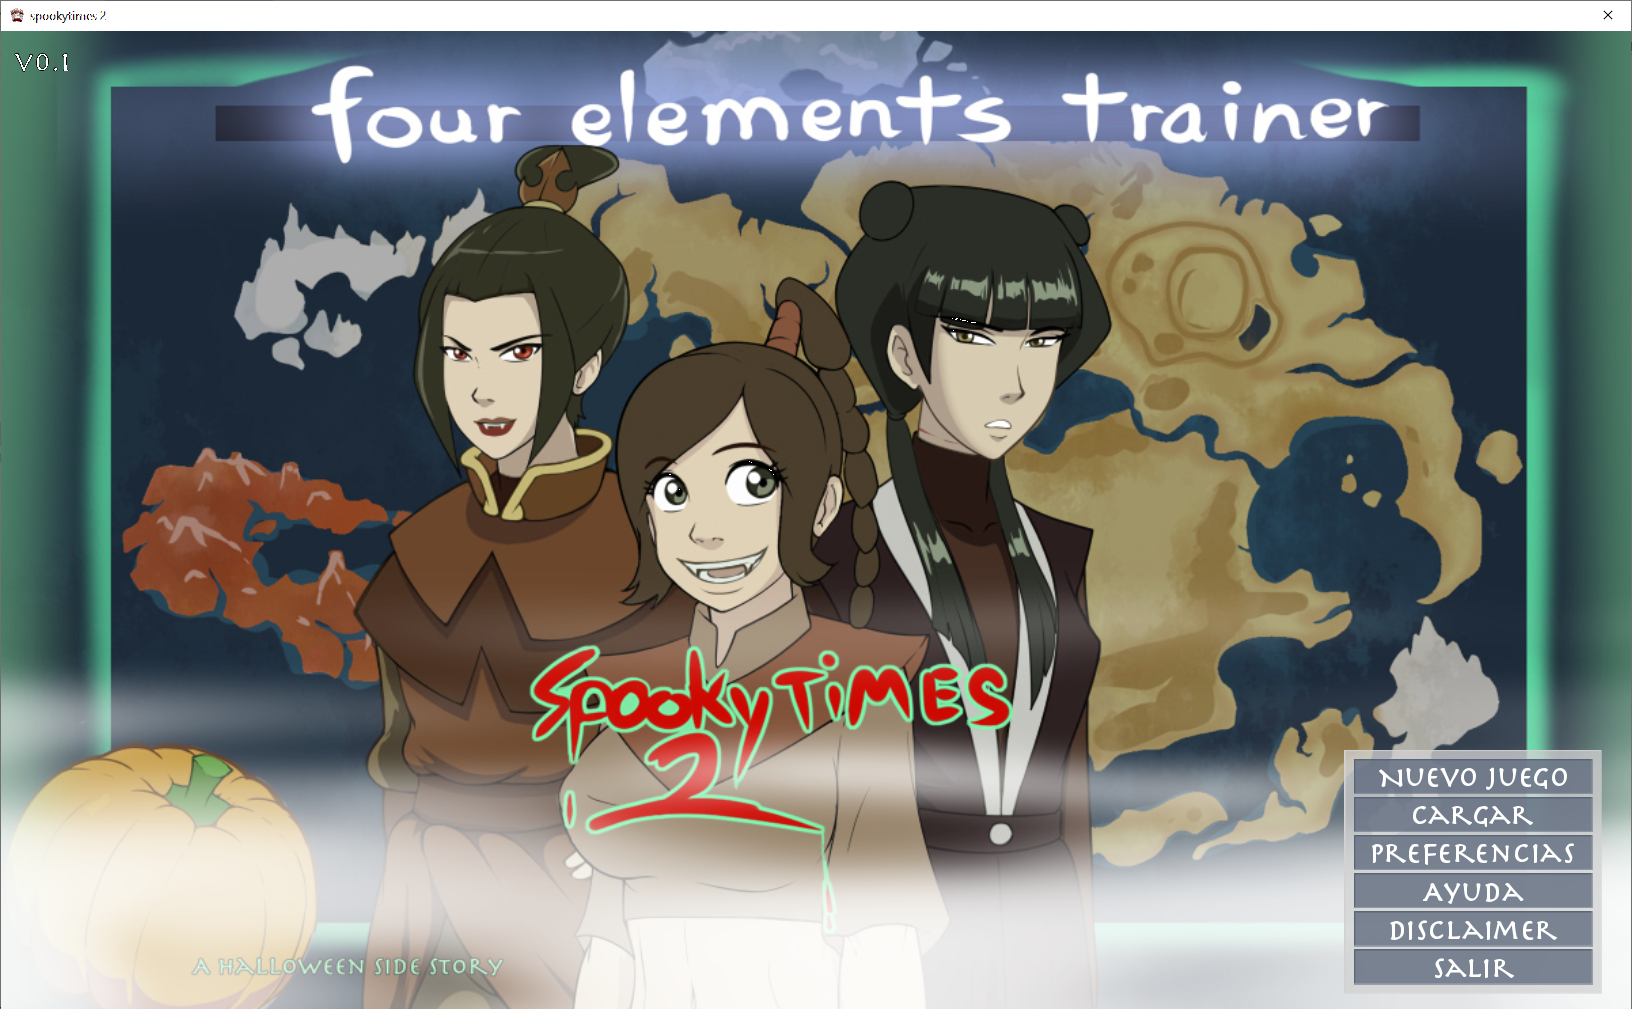 Four elements Trainer Spookytimes 2. Four elements Trainer spookytimes3. 4 Elements Trainer азула. Spooky times 2 - a four elements Side story, Part 2. Four elements trainer андроид на русском